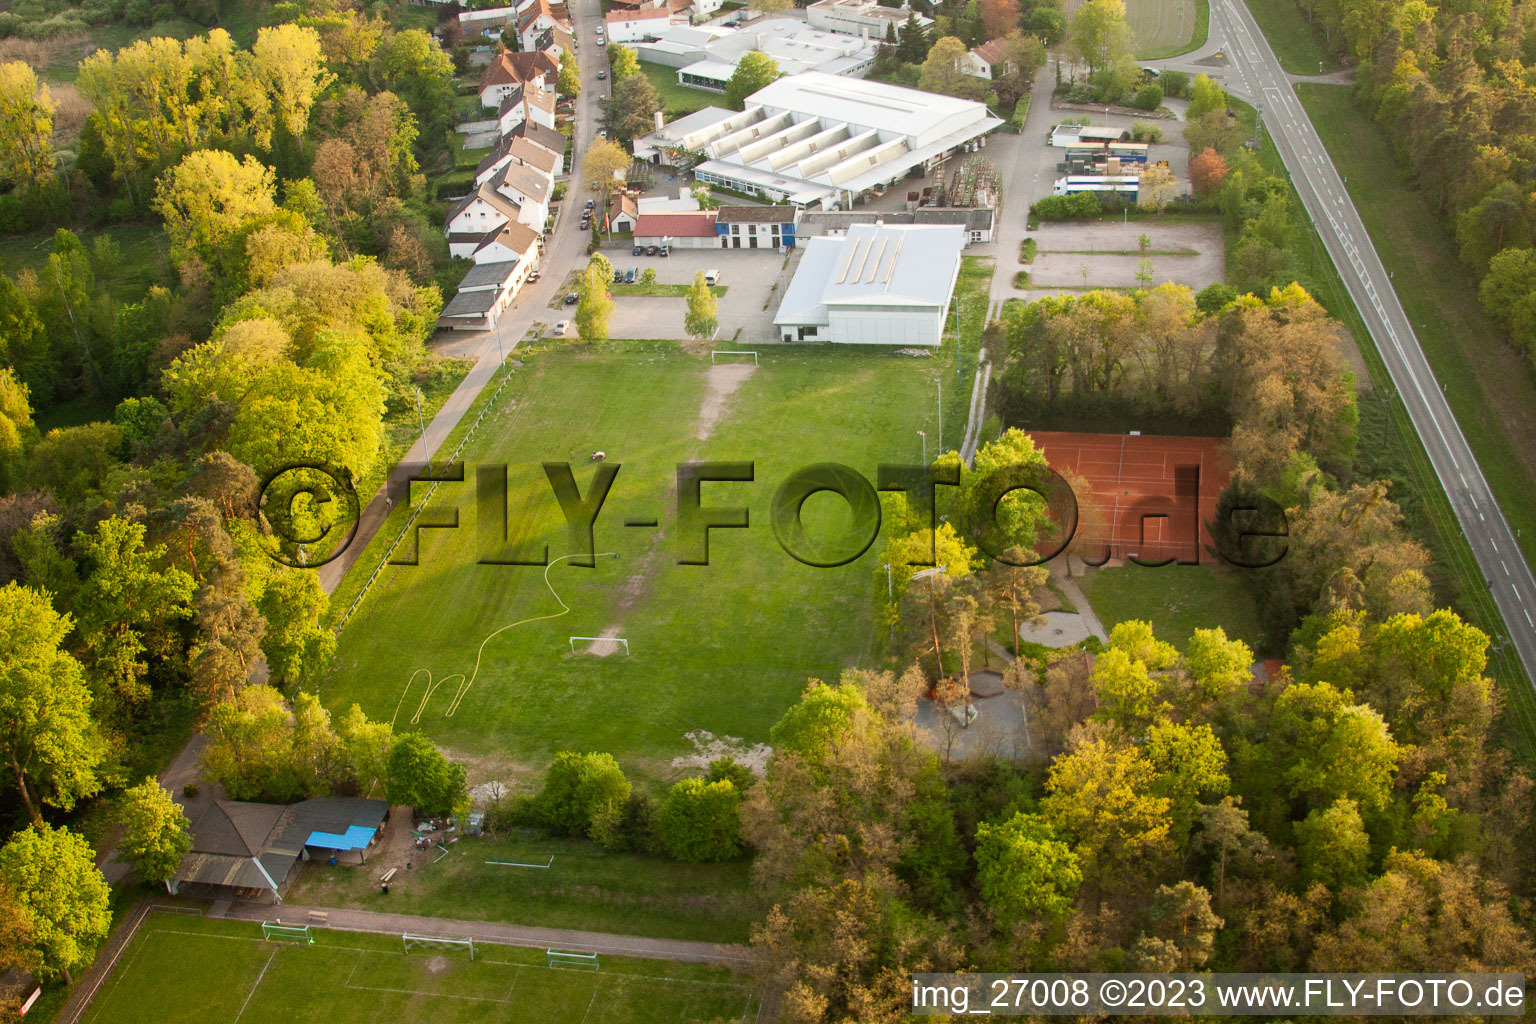 Sports facilities in Berg in the state Rhineland-Palatinate, Germany